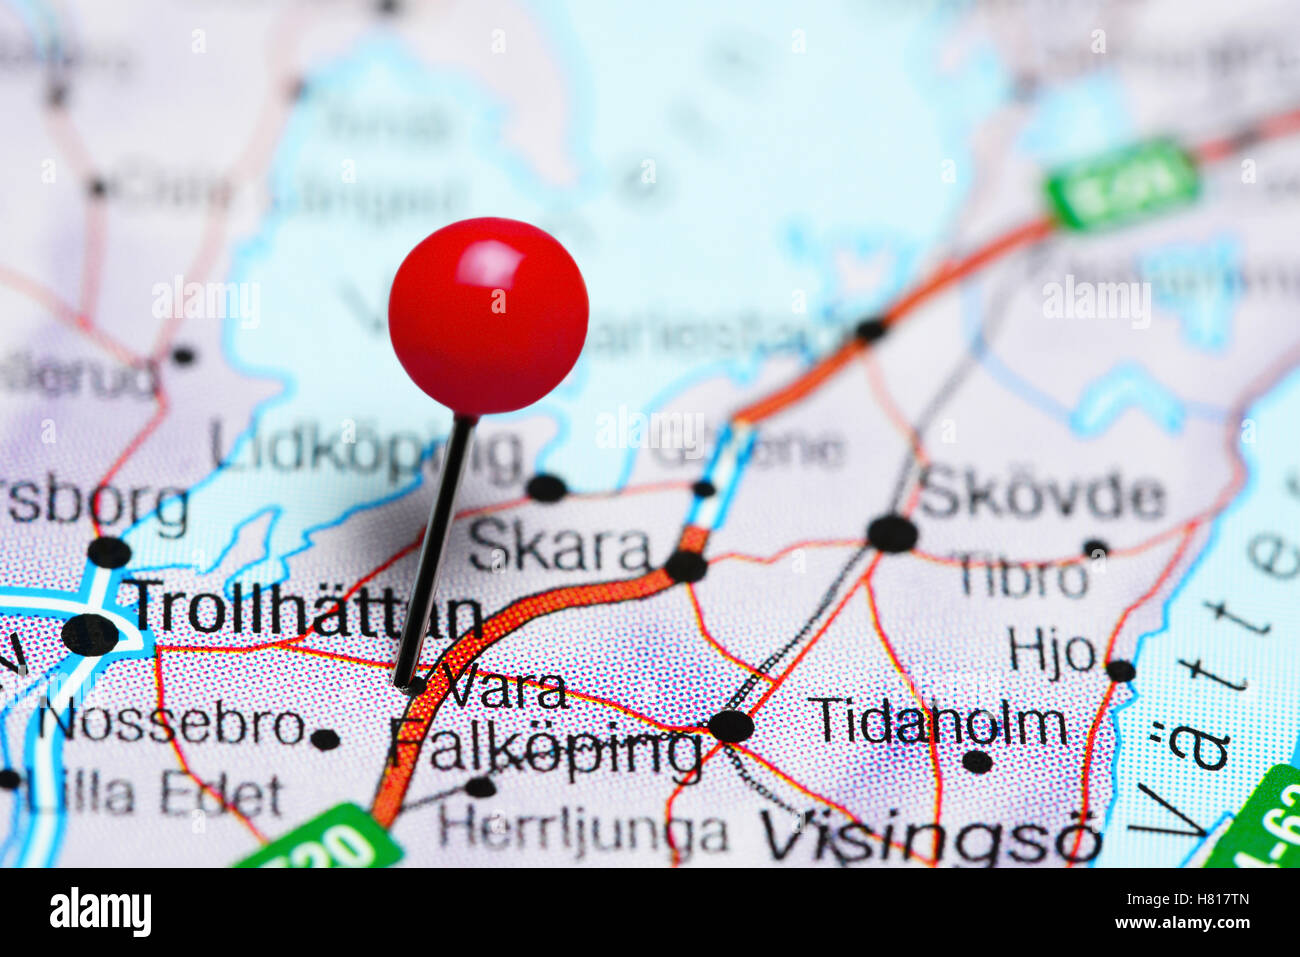 Vara pinned on a map of Sweden Stock Photo